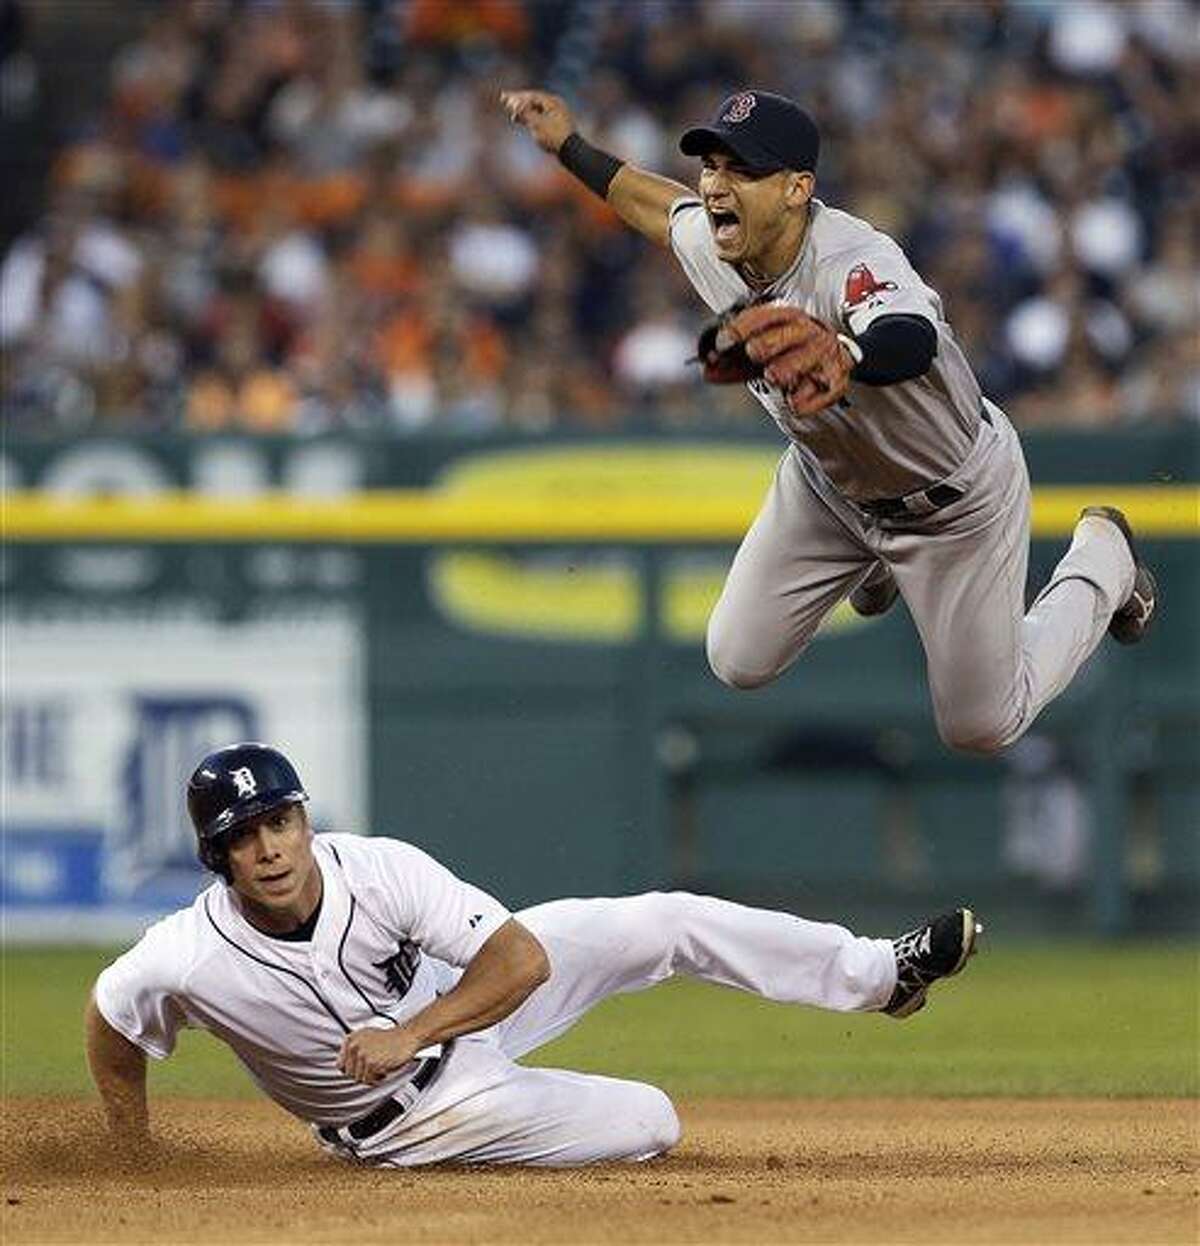 Boston Red Sox's Jose Iglesias jumps after Detroit Tigers' Andy Dirks, bottom, slides to break up the throw to first base on a Brayan Pena fielders choice in the seventh inning of a baseball game in Detroit, Thursday, June 20, 2013. Pena was safe at first base. (AP Photo/Paul Sancya)